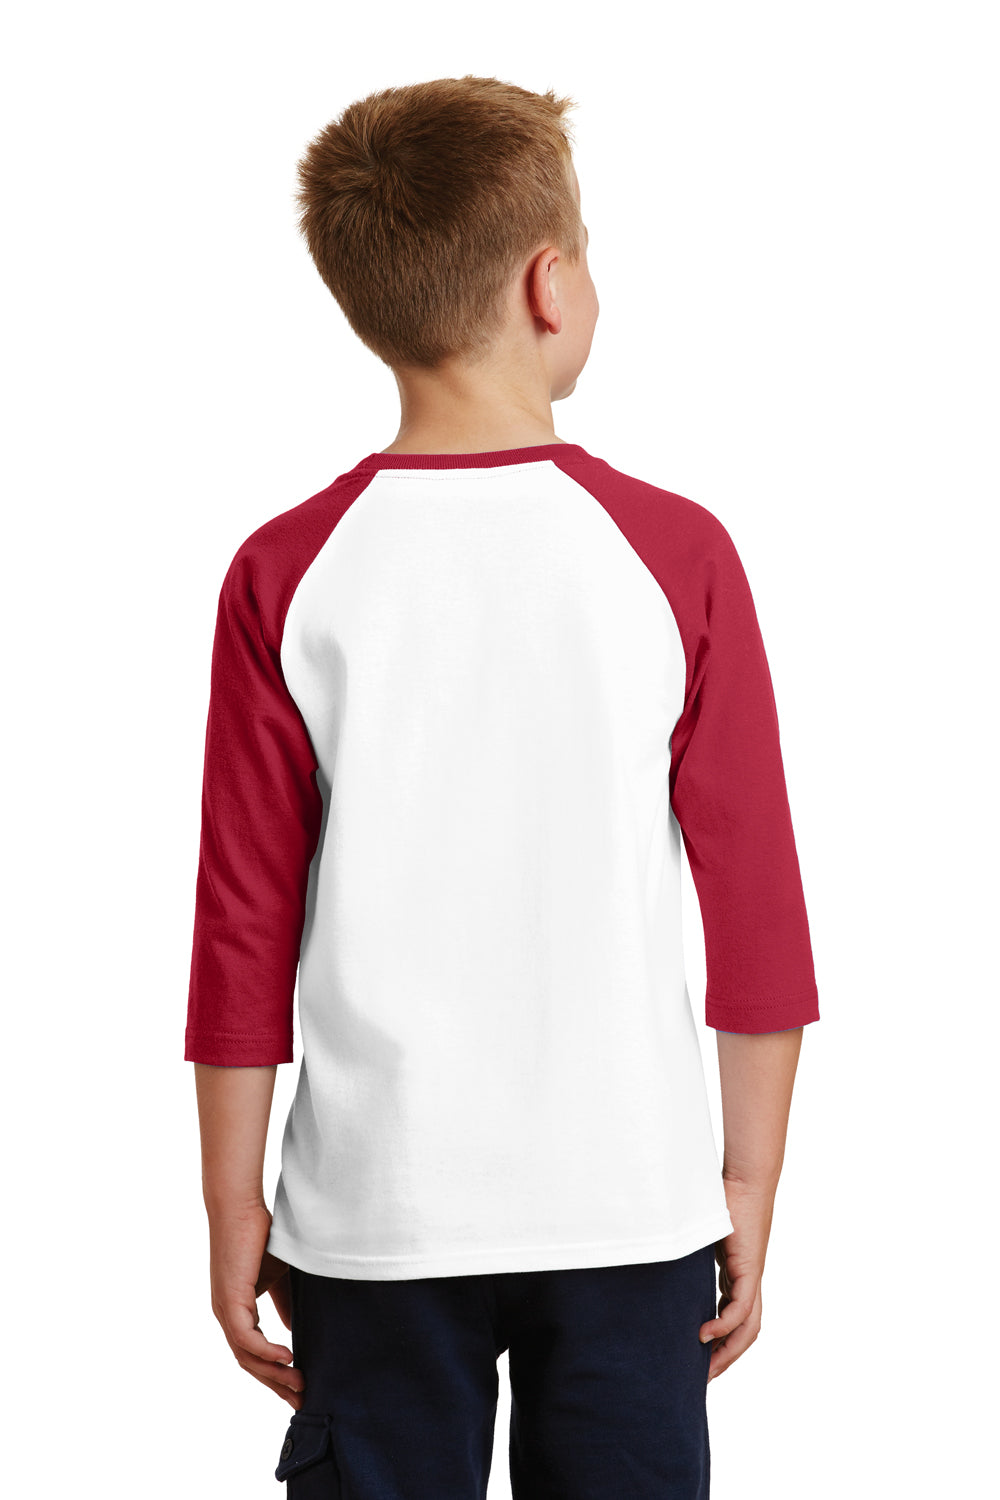 Port & Company PC55YRS Youth Core Moisture Wicking 3/4 Sleeve Crewneck T-Shirt White/Red Back